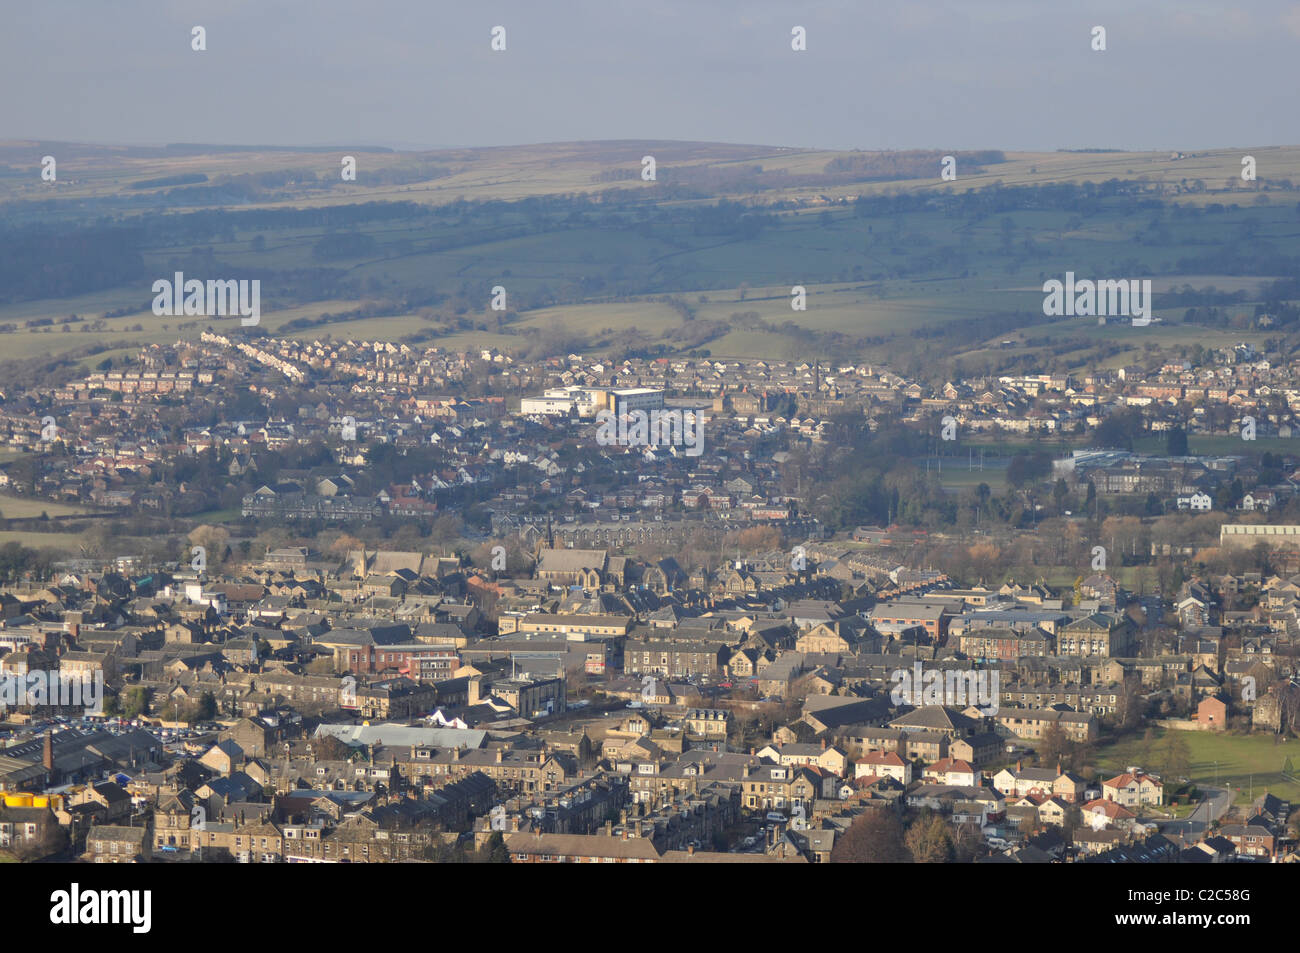 Panoramic image of a Yorkshire town called Otley Stock Photo